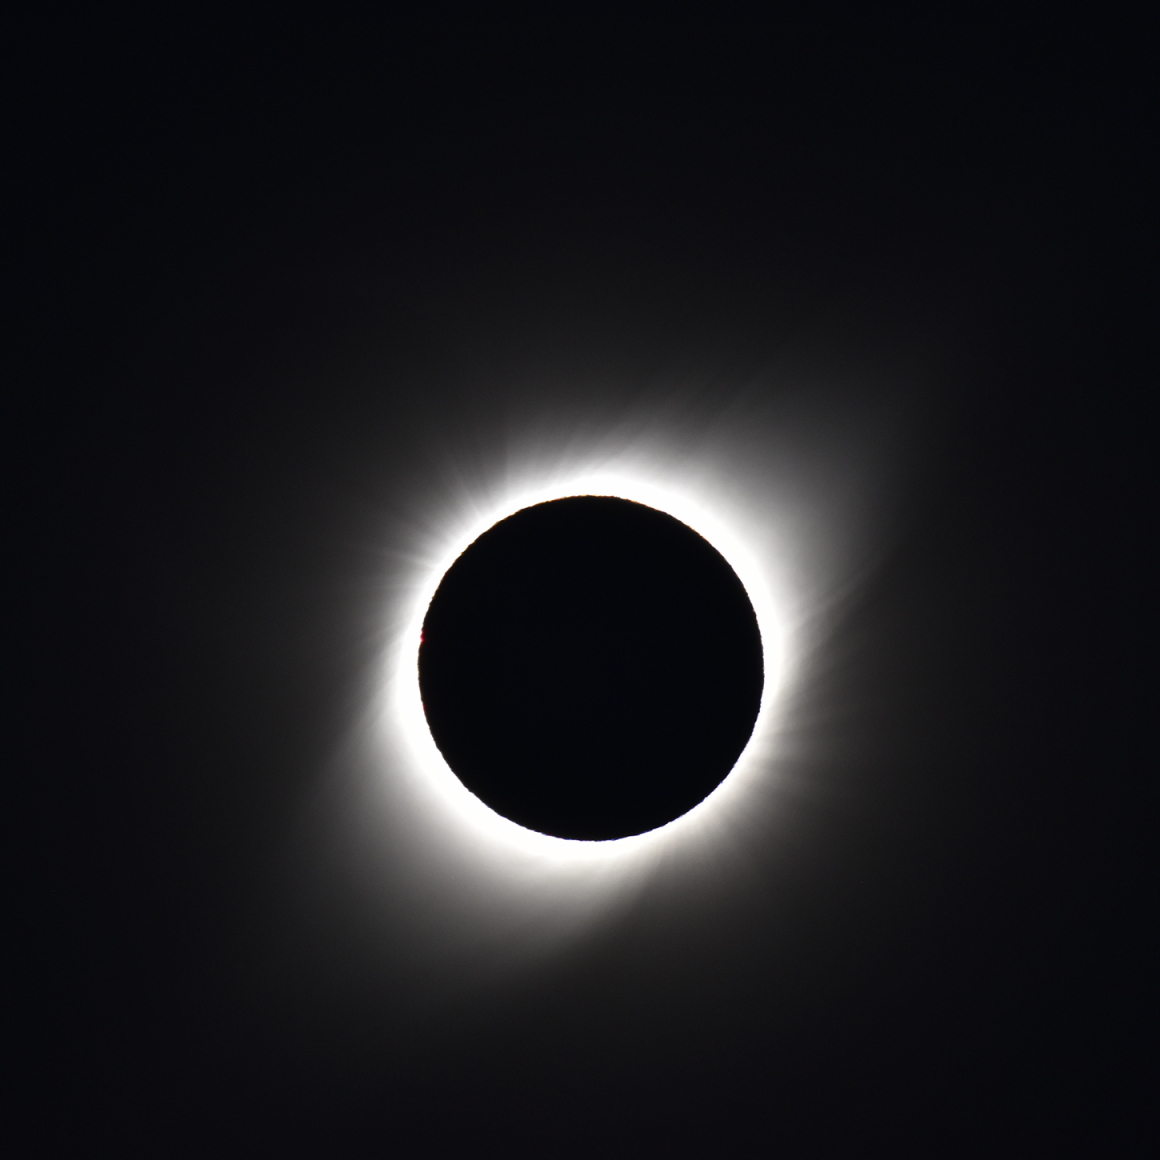 A photo of the total eclipse in Chile